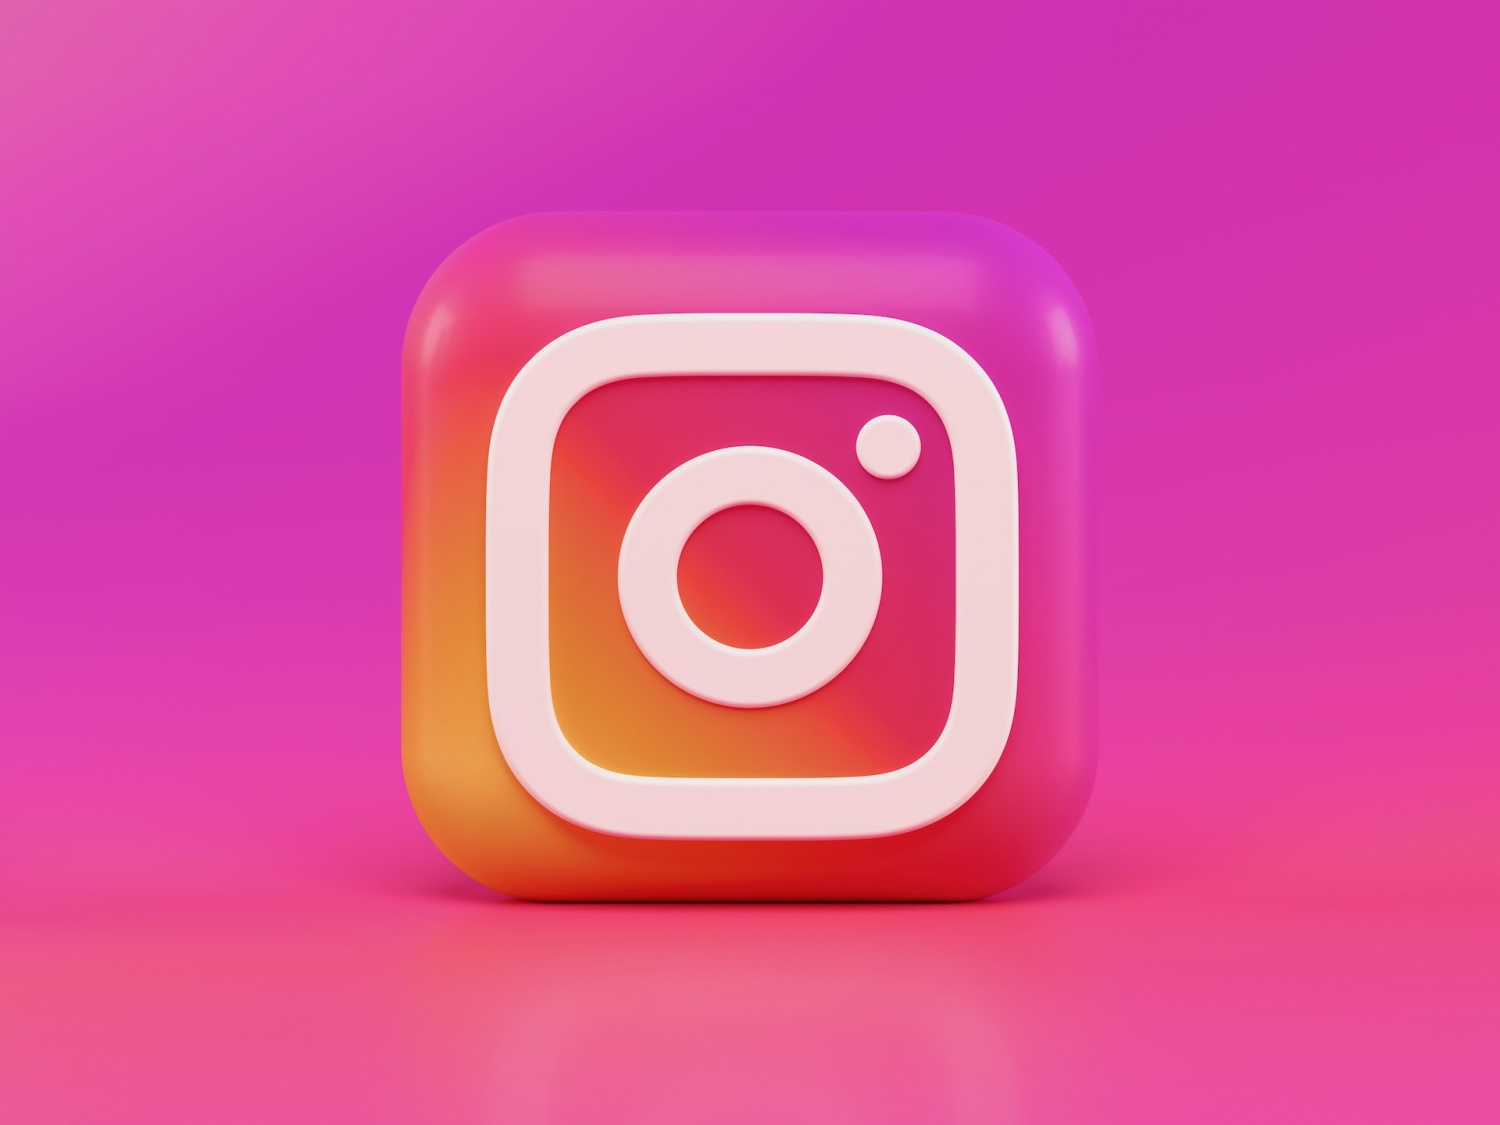  Instagram Rolls Out Global Reels Download Feature